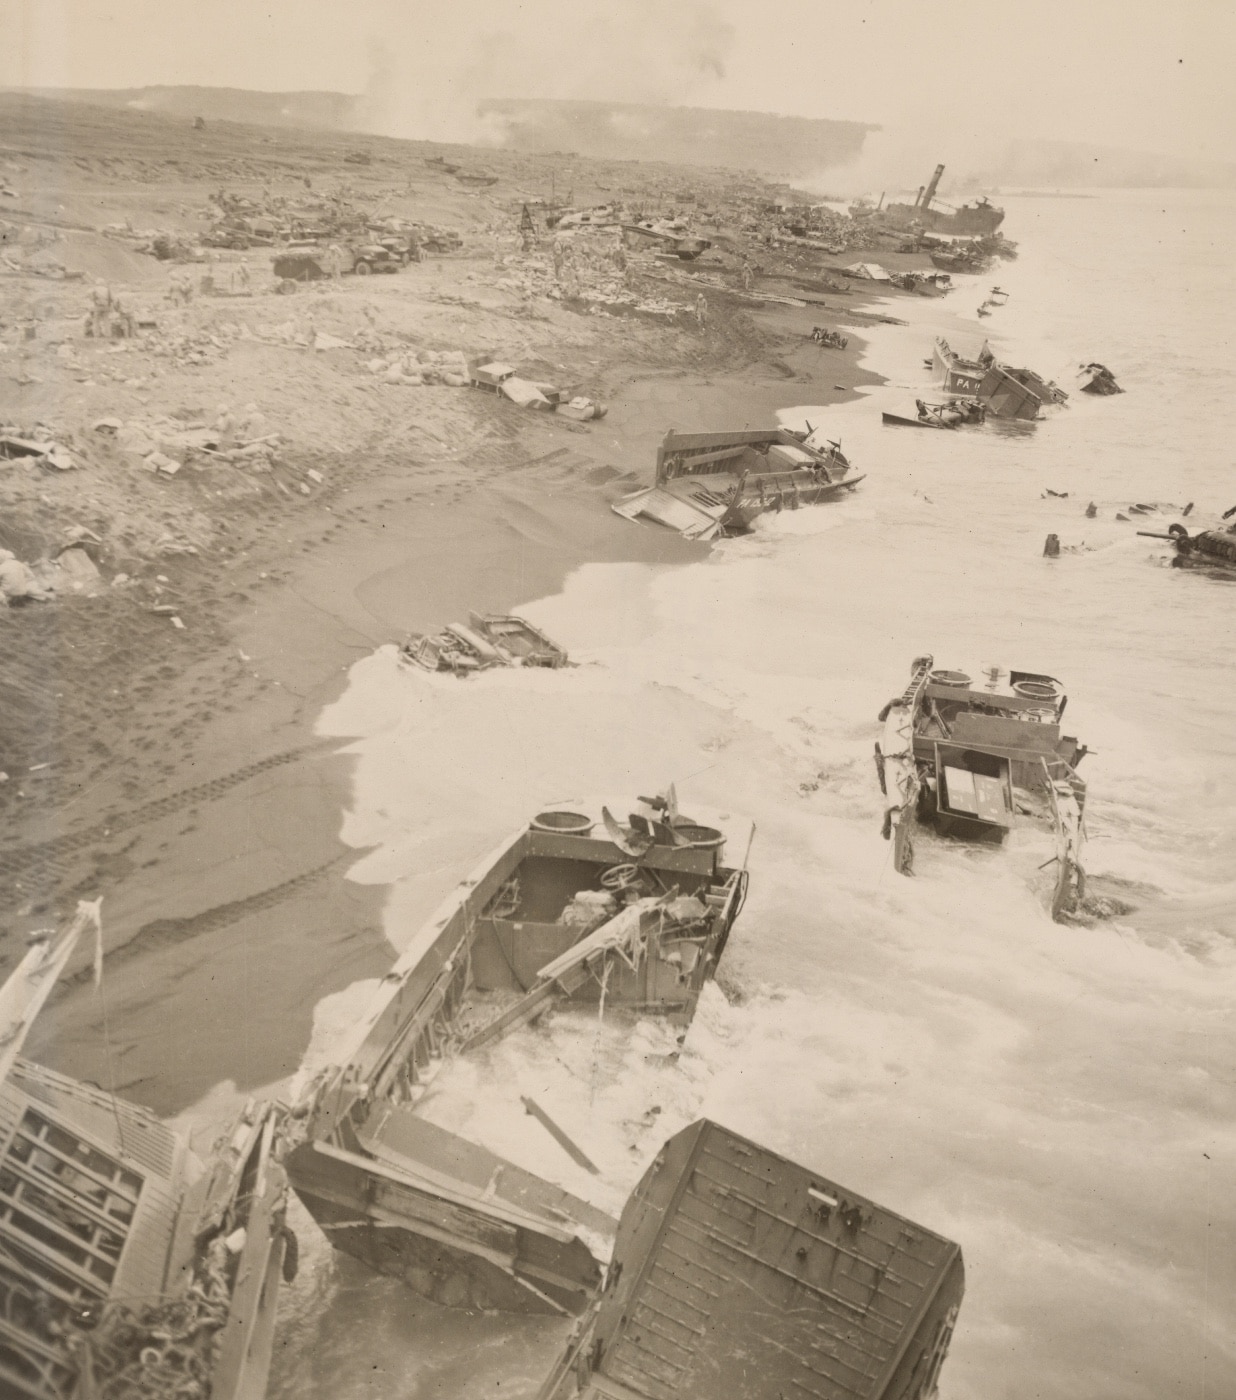 The wreckage of landing craft along the shoreline on the second day of the battle testifies to the stiff opposition put up by the defending Japanese. Image: Cpl. Eugene Jones/U.S. Marine Corps